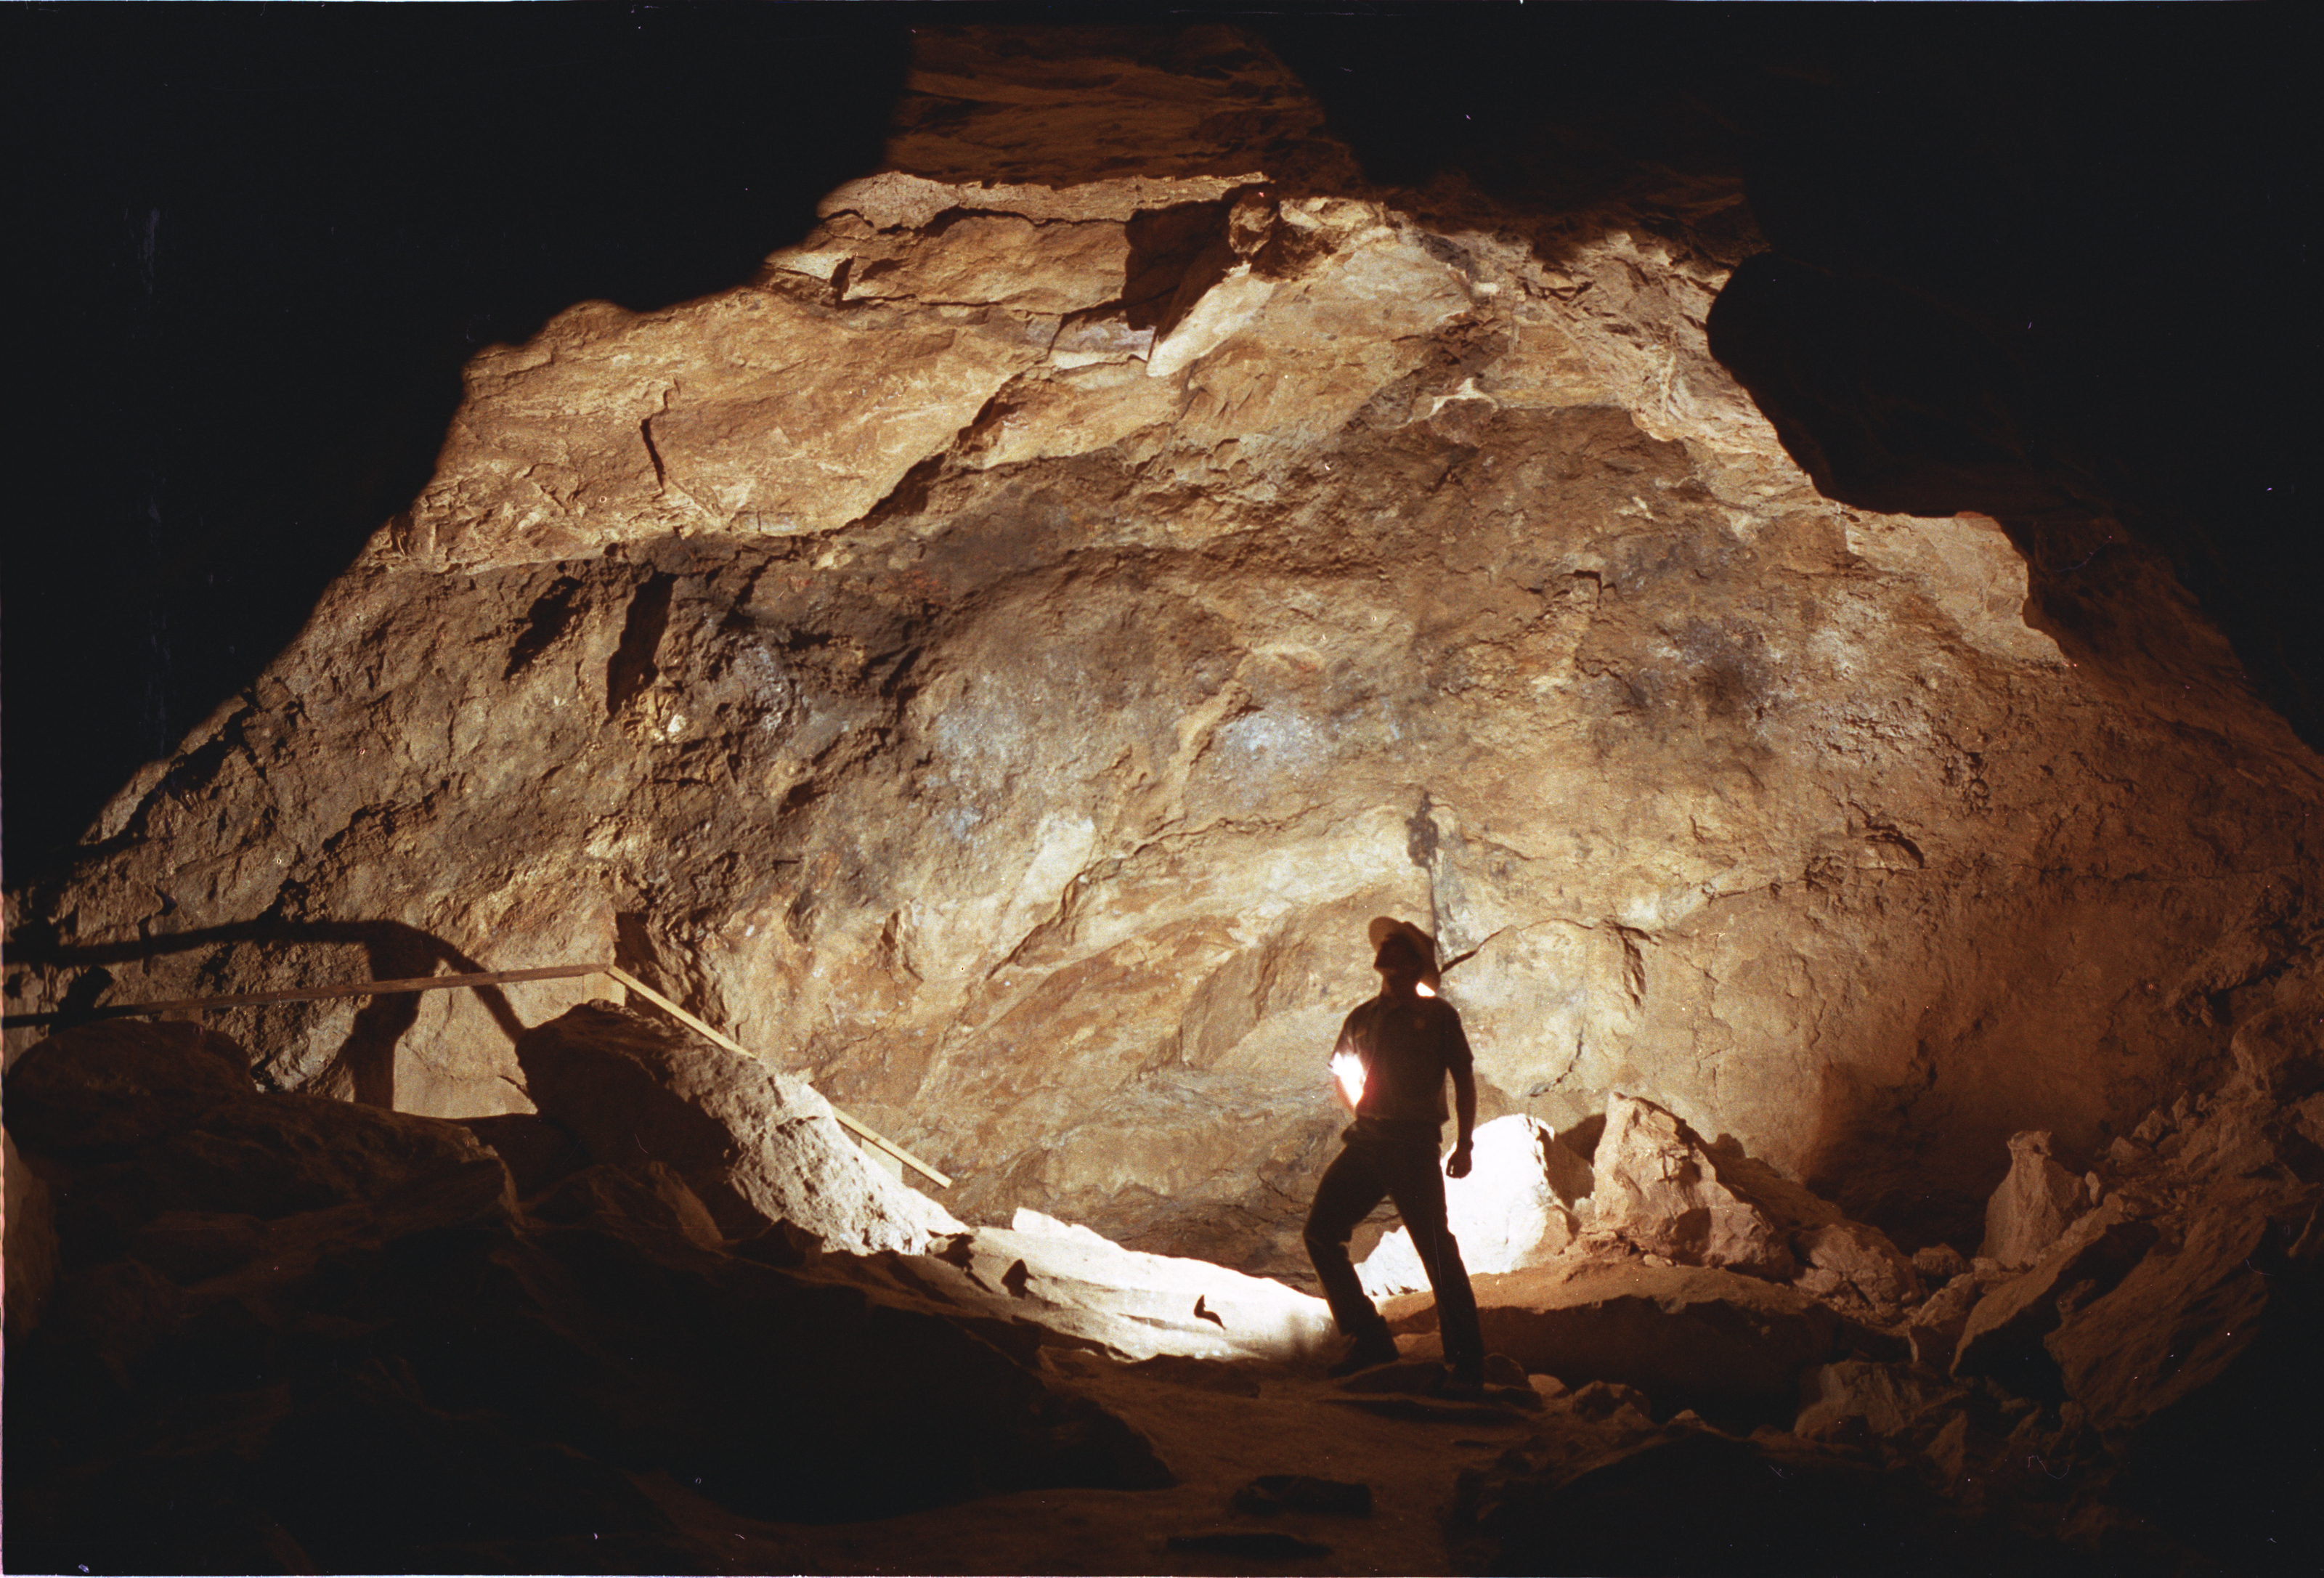 A park ranger stands as a silhouette in a large room in Jewel Cave.